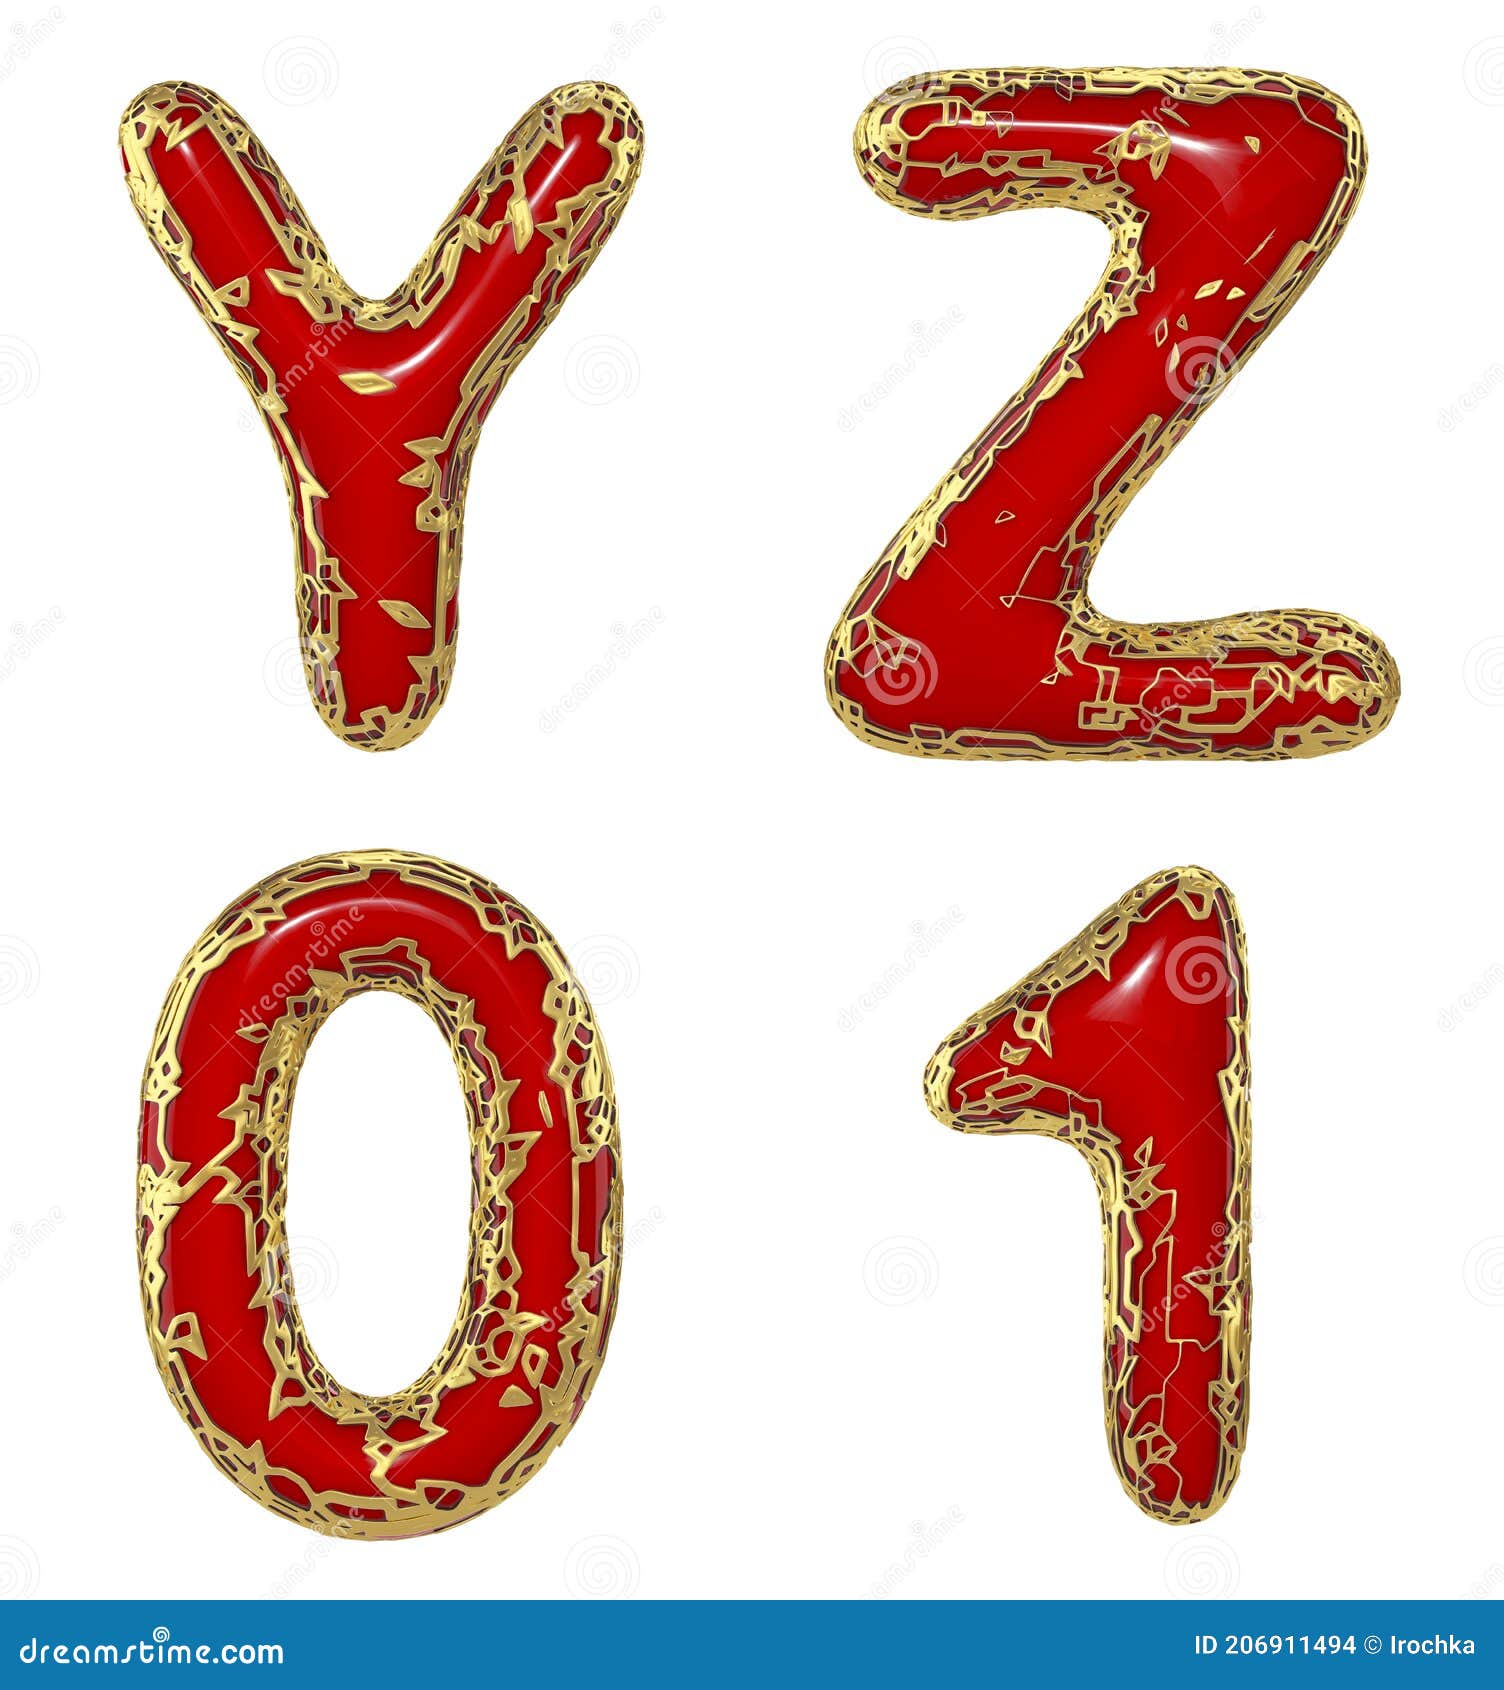 realistic 3d letters set y, z, 0, 1 made of gold shining metal letters.